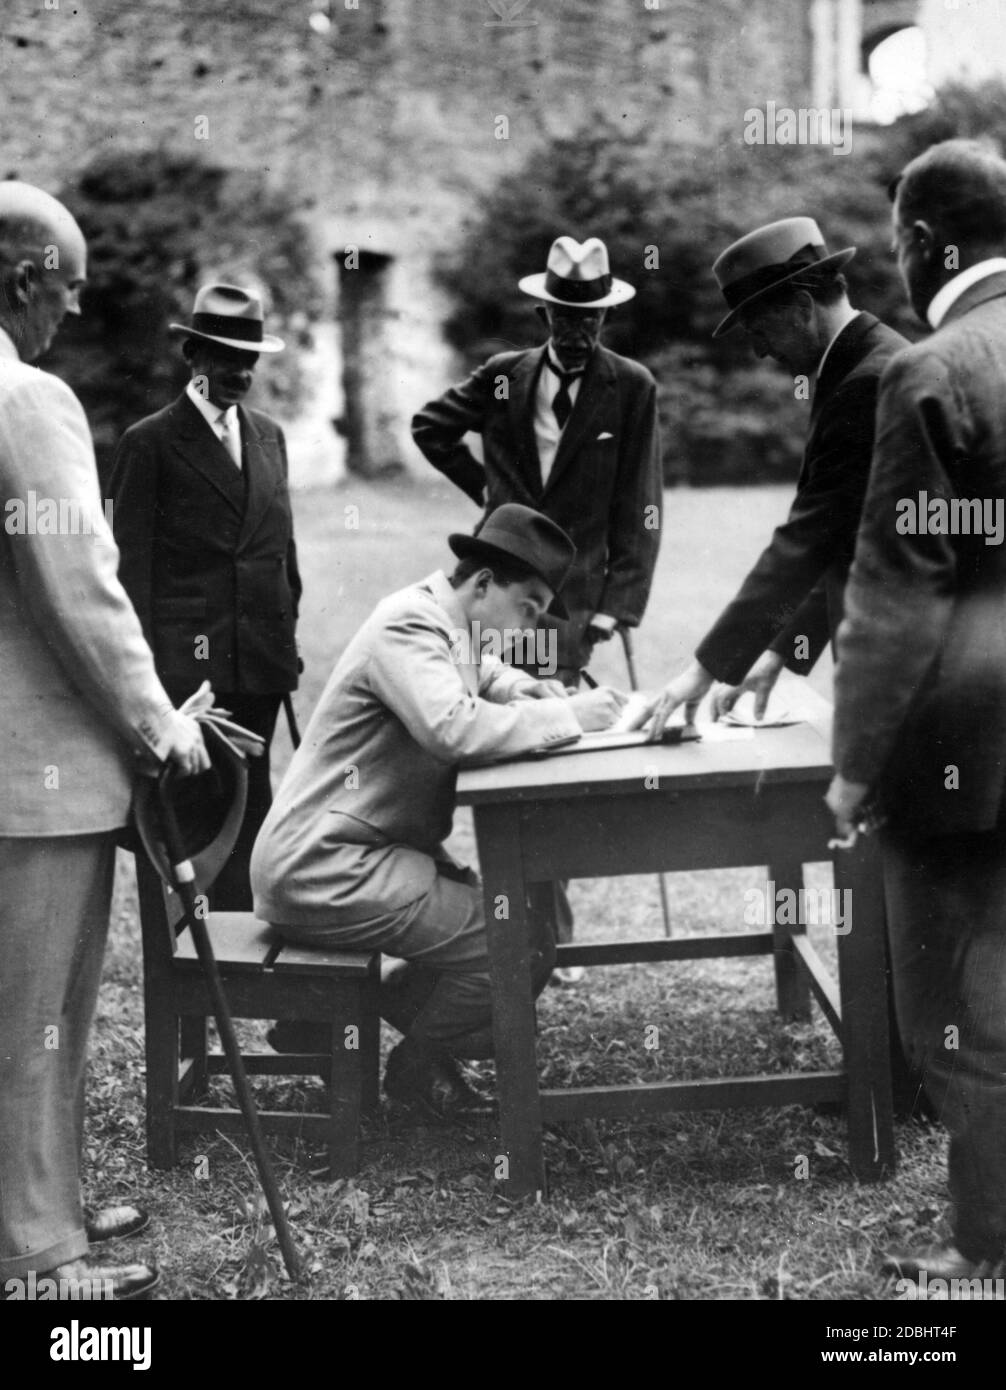 Otto von Habsburg signs the guest book during a visit to the summer residence of the Swedish king. Behind him is King Gustav V of Sweden. Stock Photo